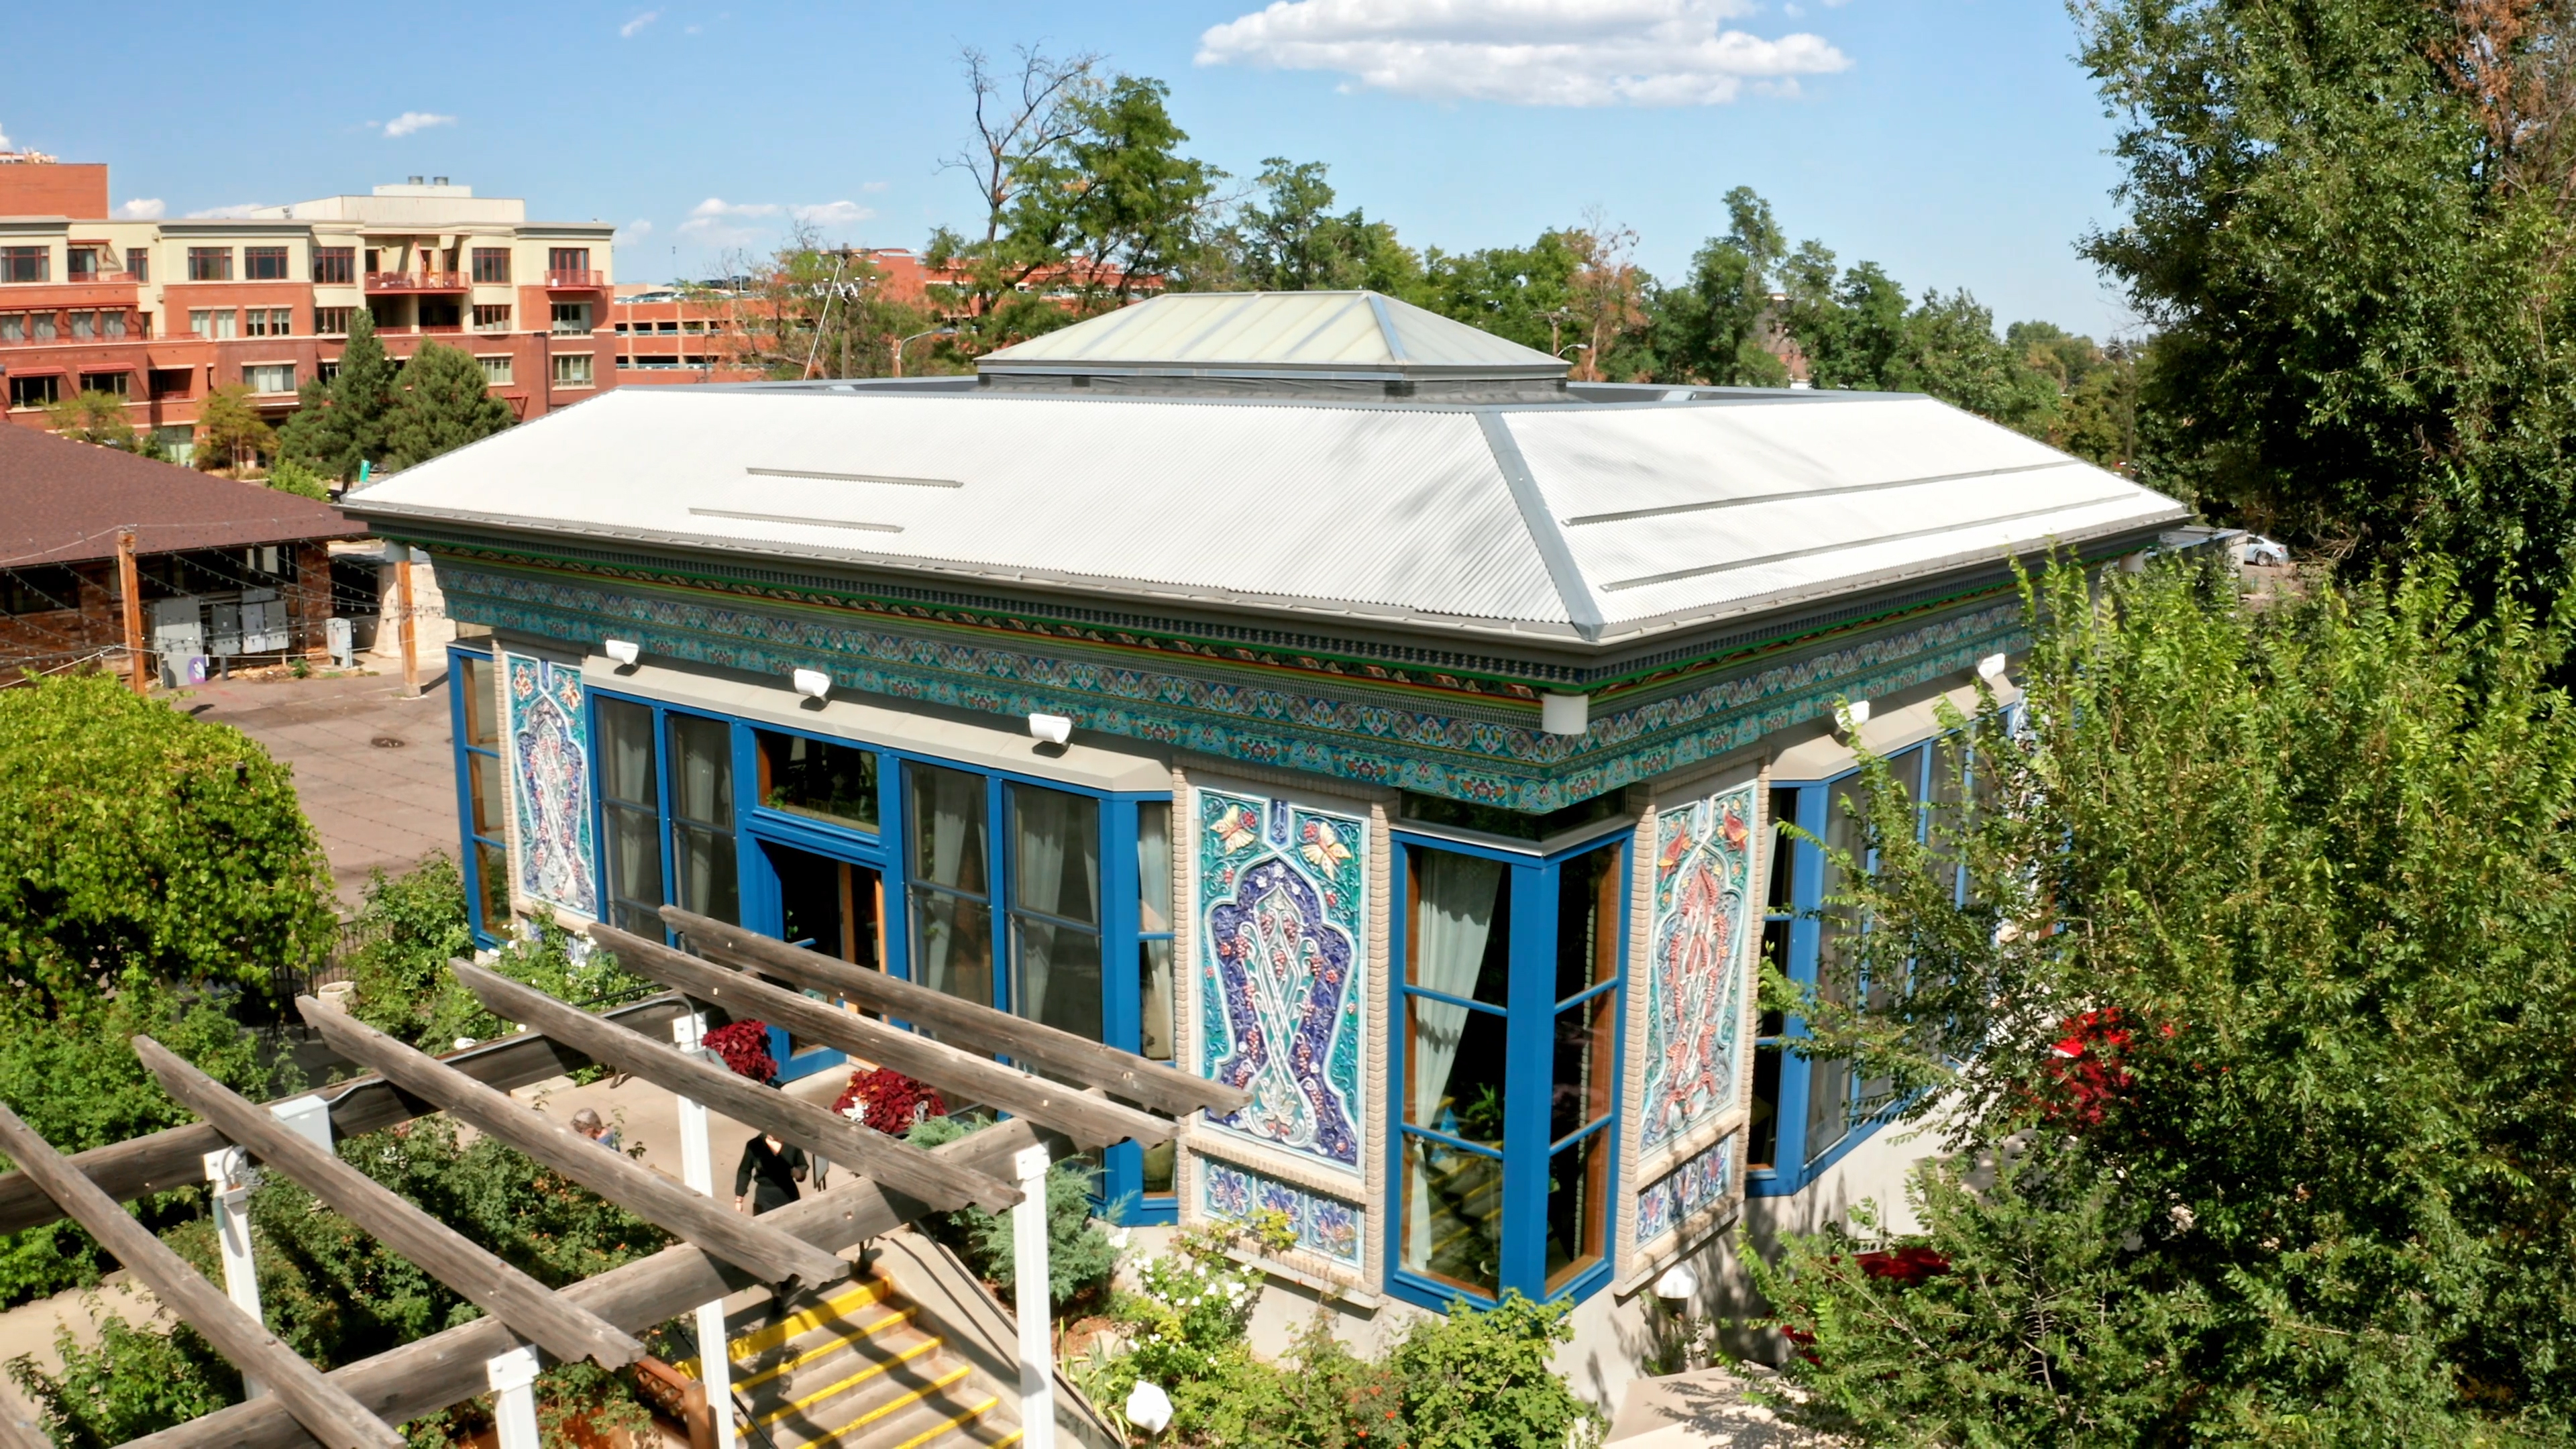 Dushanbe Teahouse in Boulder, CO